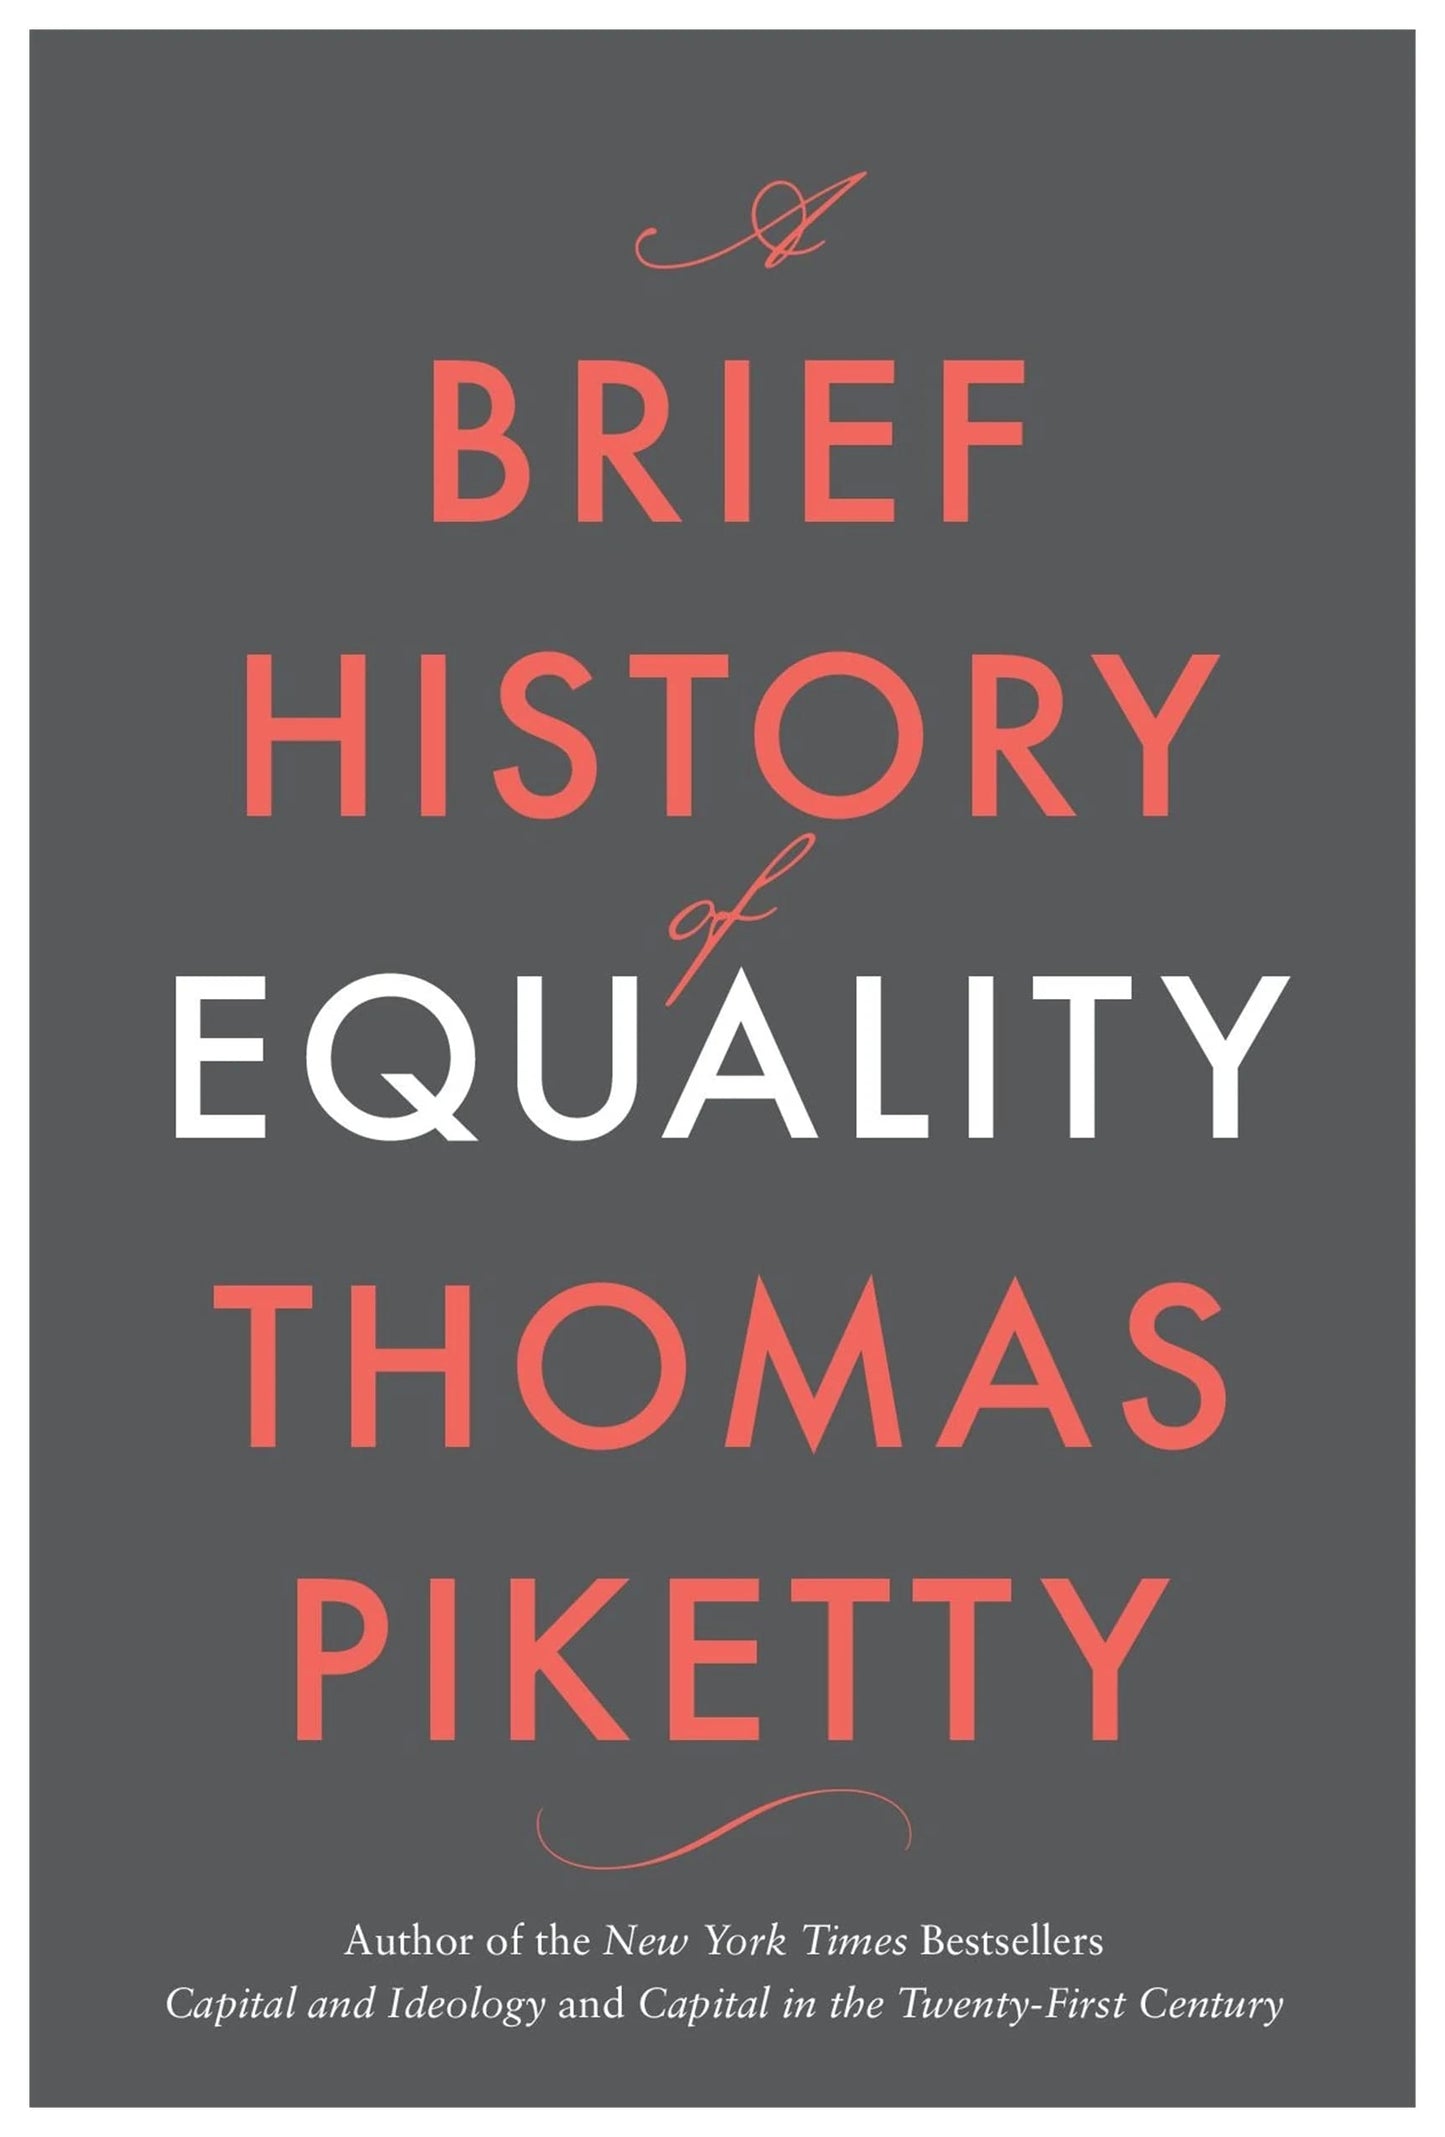 A Brief History of Equality - BIBLIONEPAL